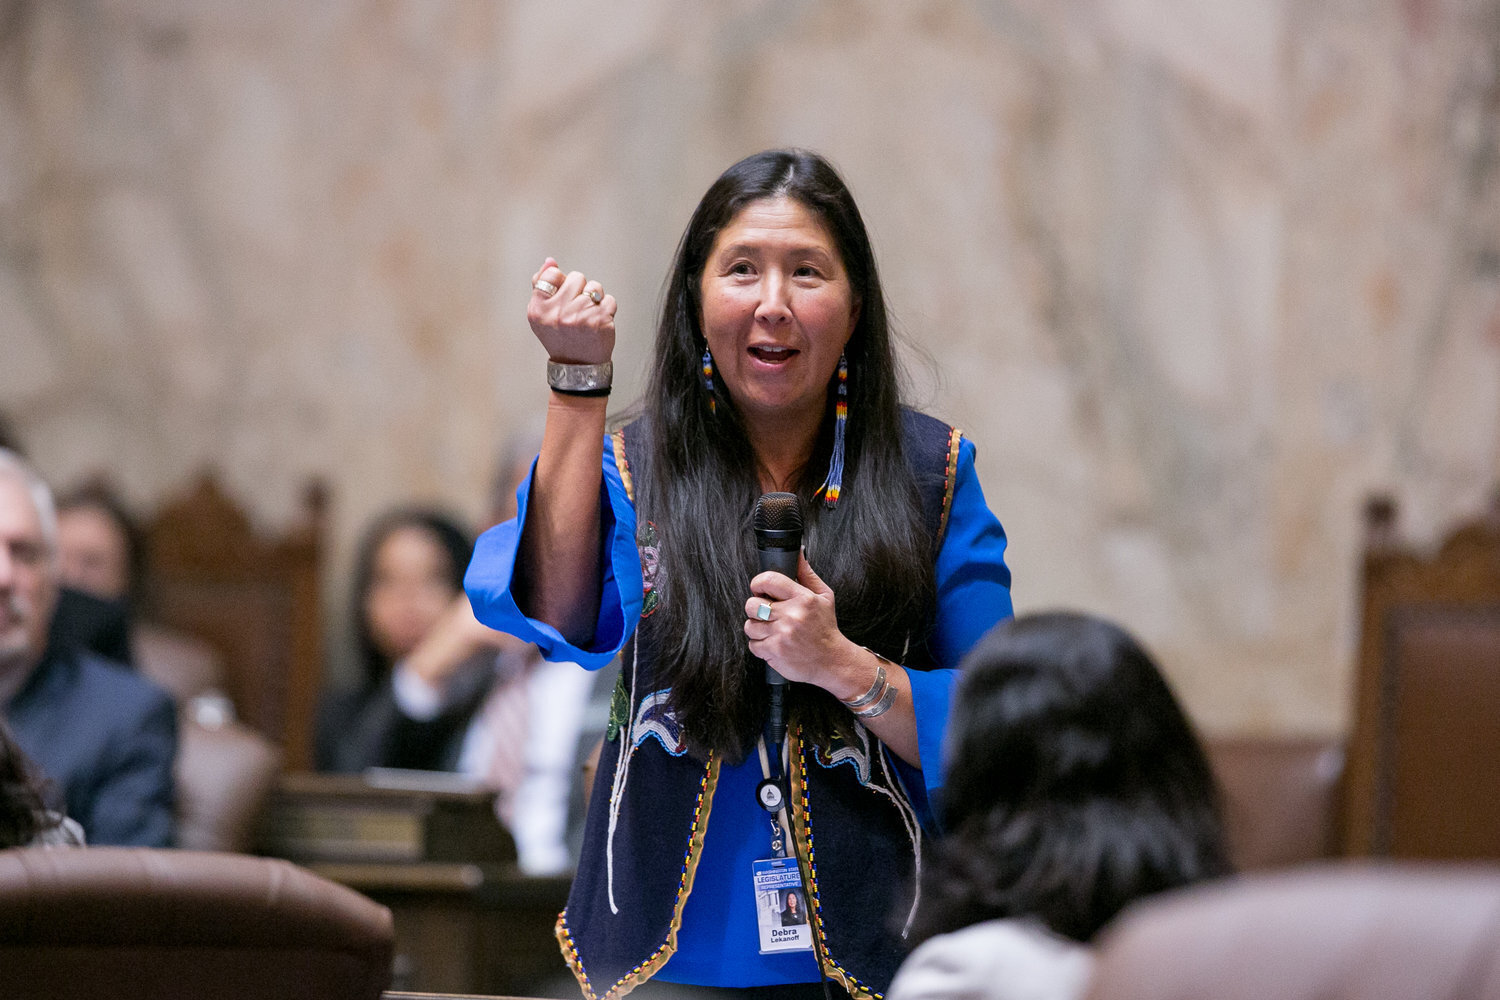 Debra Lekanoff is the only Native American in the Washington State Legislature. Her bill created the Missing Indigenous Person Alert (MIPA) system, a new statewide alert system for missing Indigenous people.